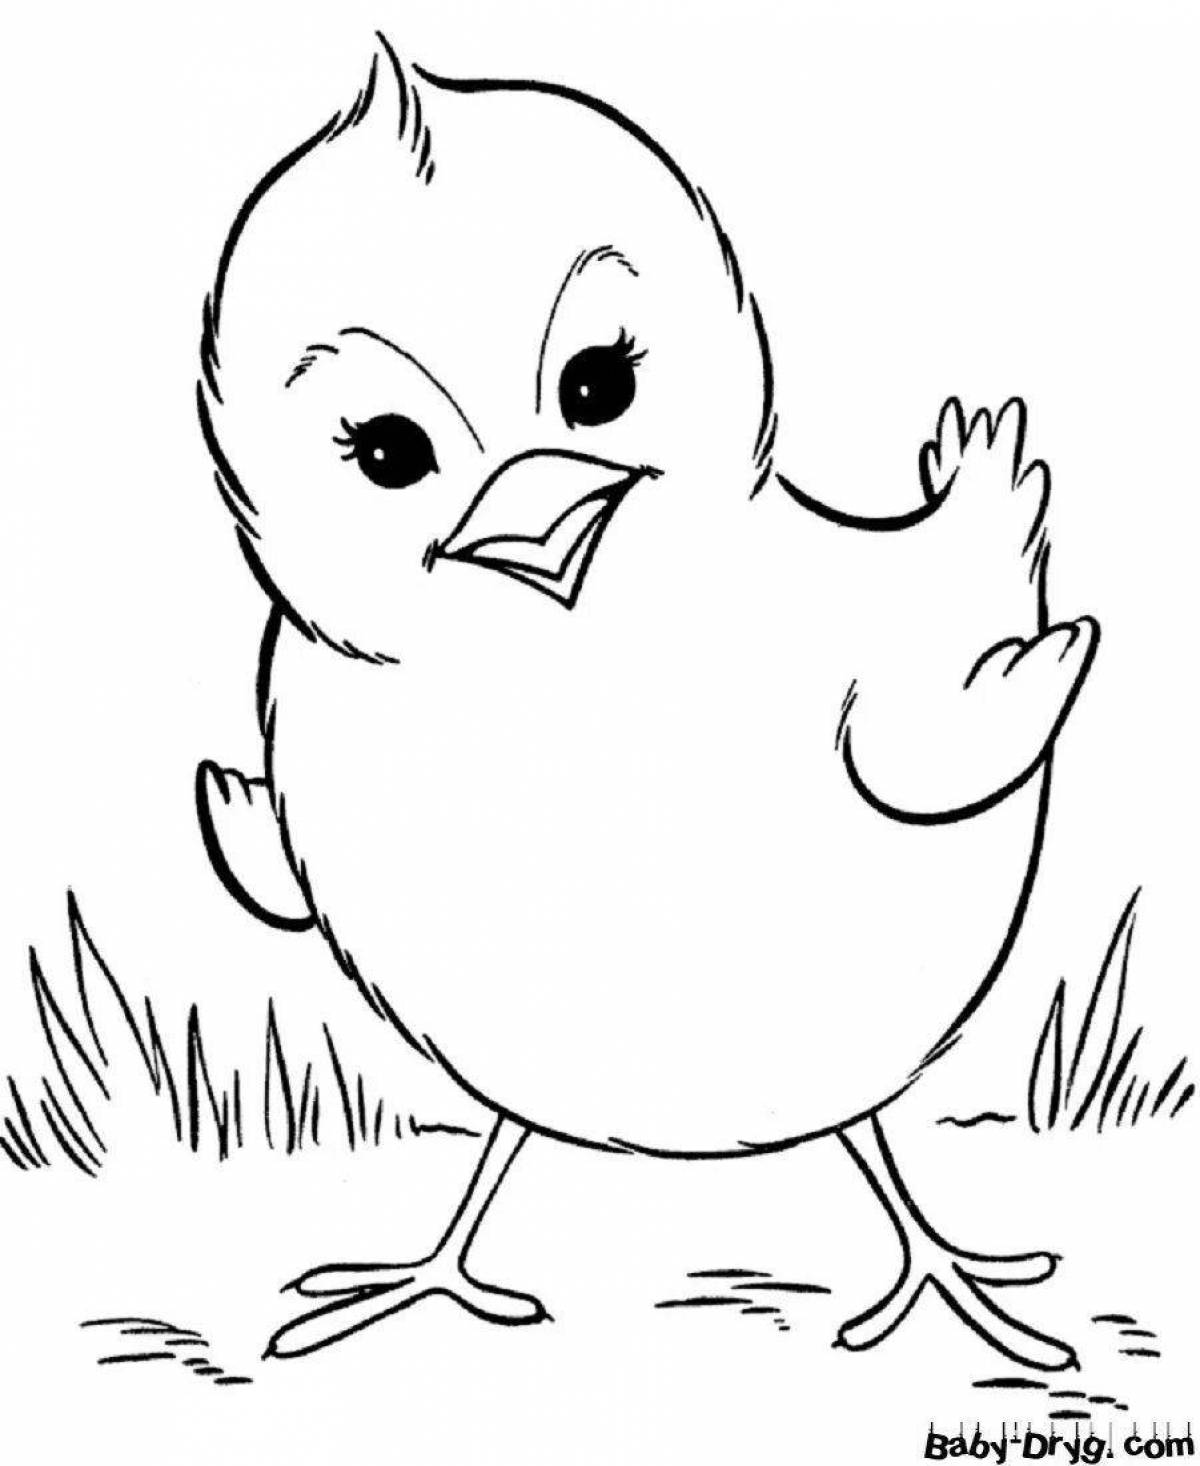 Cute chick coloring book